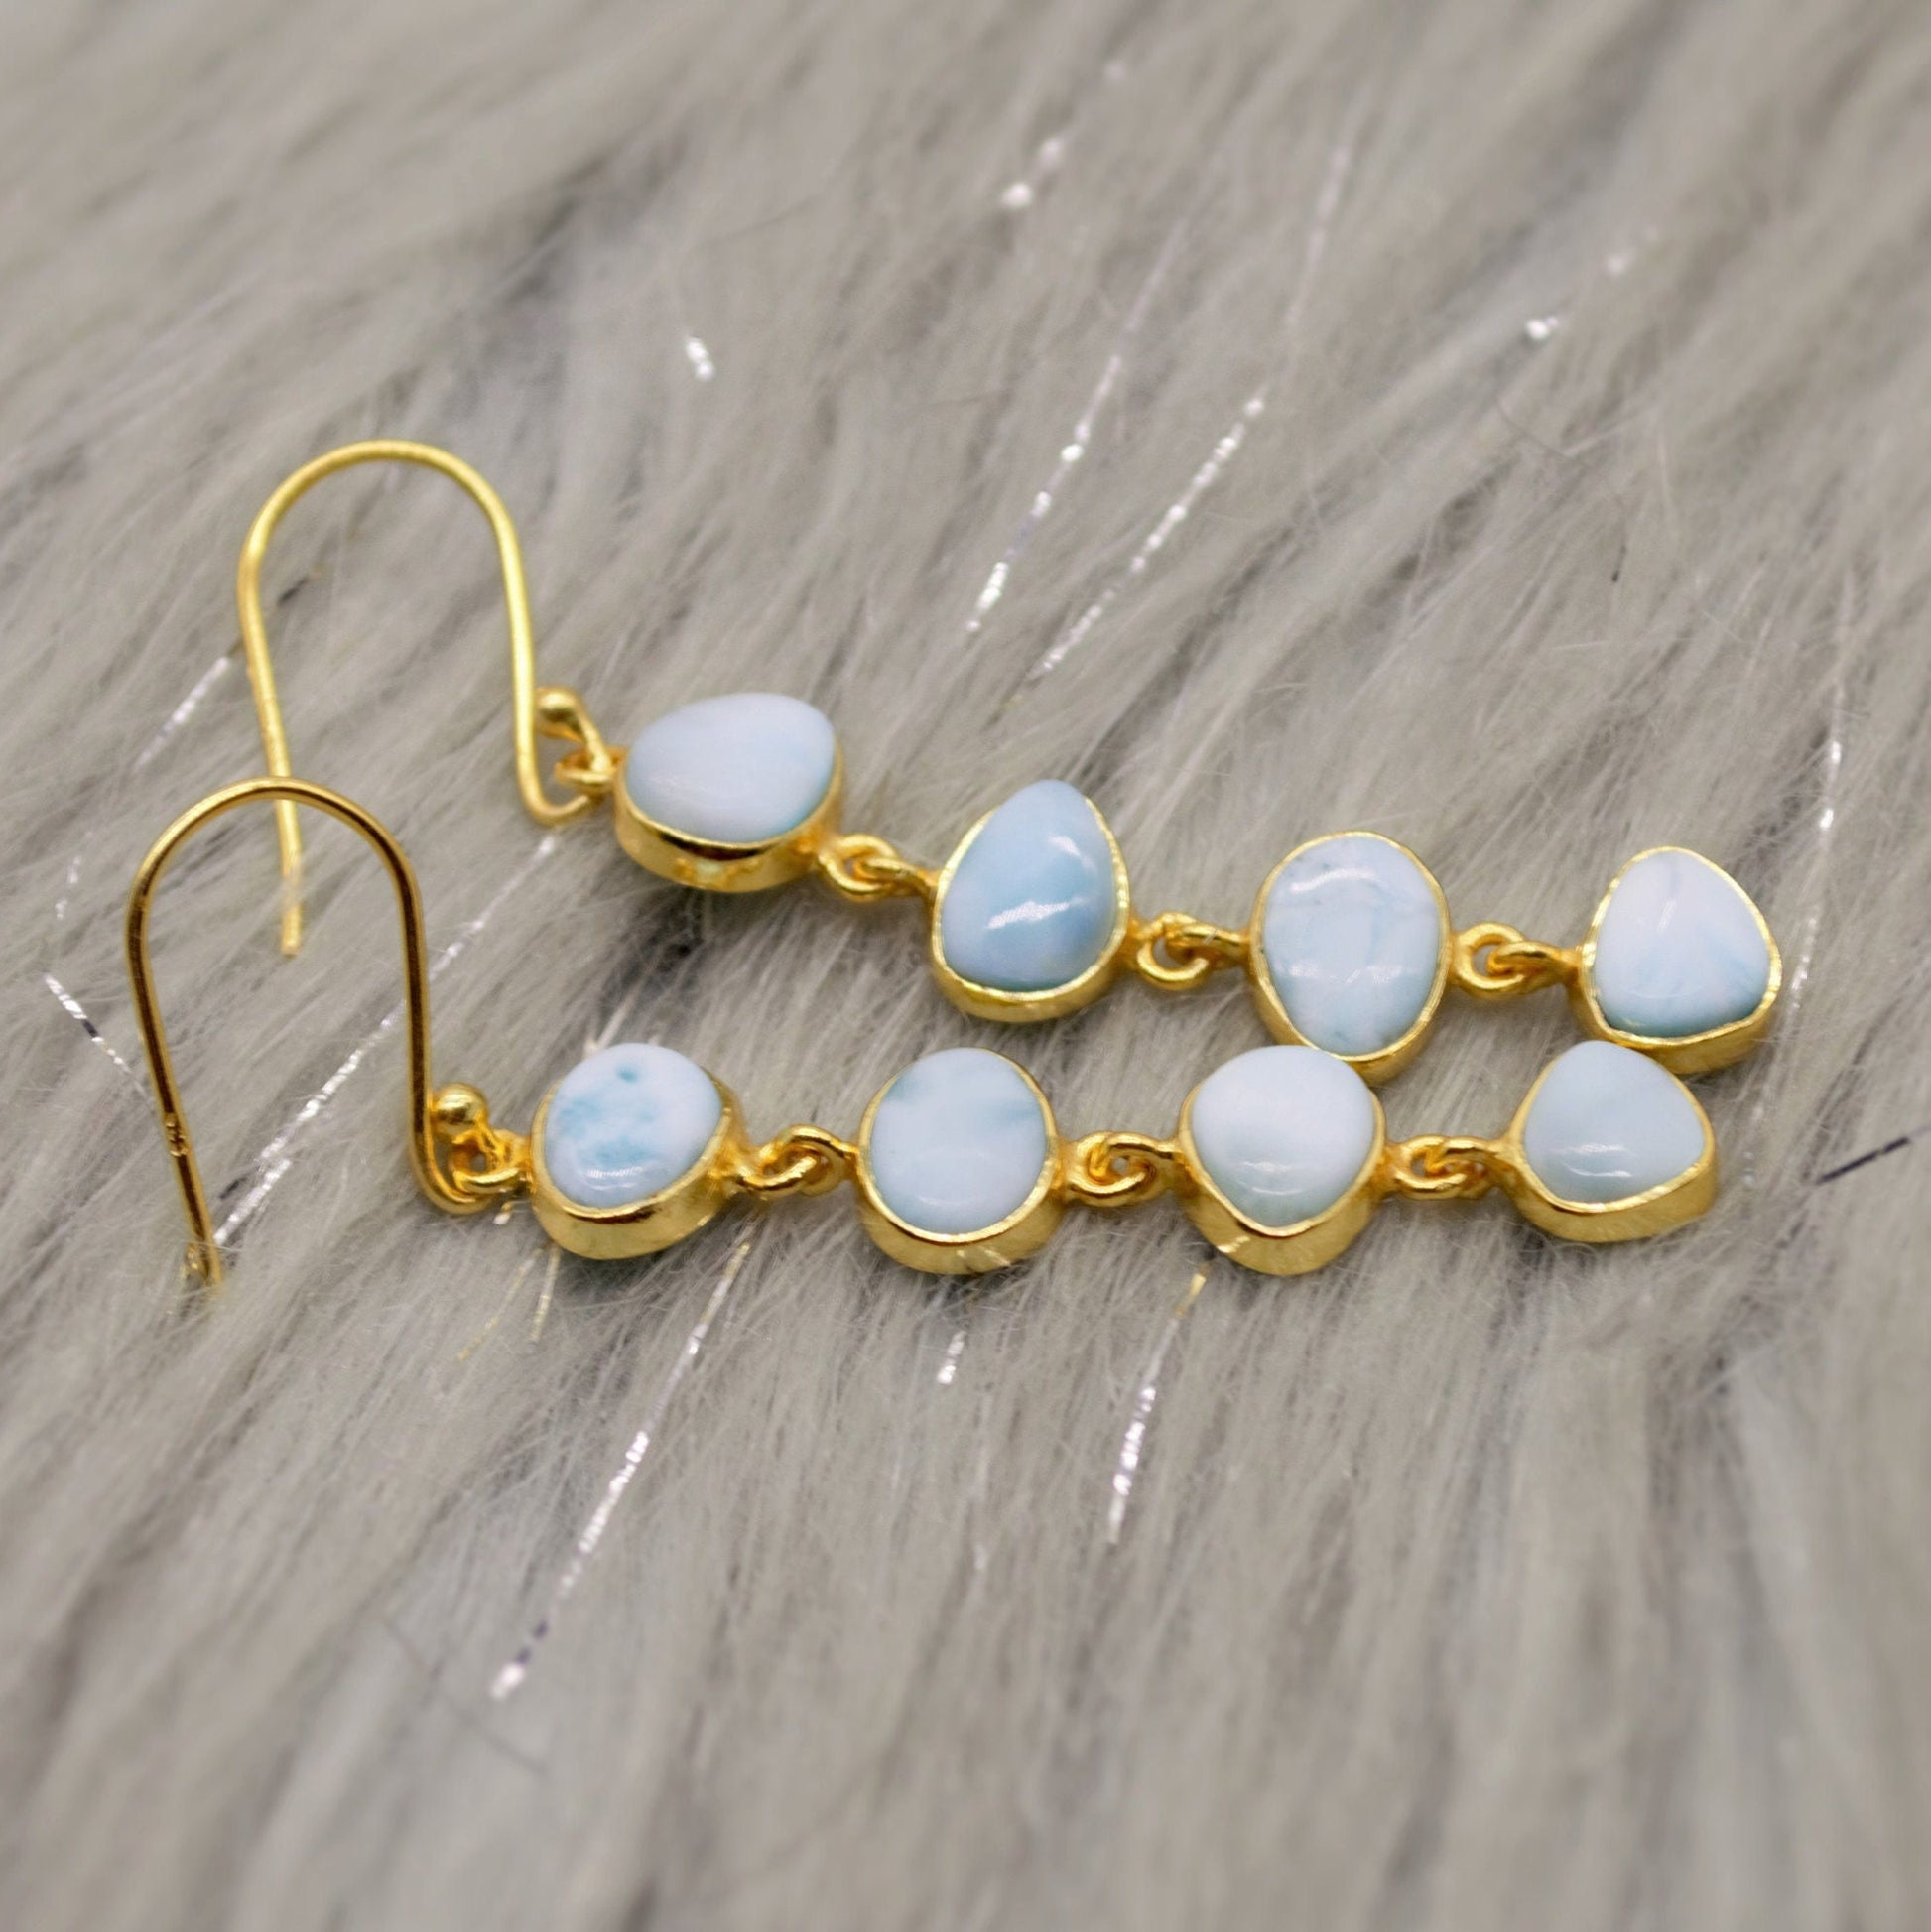 Larimar Dangle Drop Earrings, Gold Plated Sterling Silver Earrings, Blue Larimar Stone, Unique Larimar Gemstone, Handmade Gifts For Her